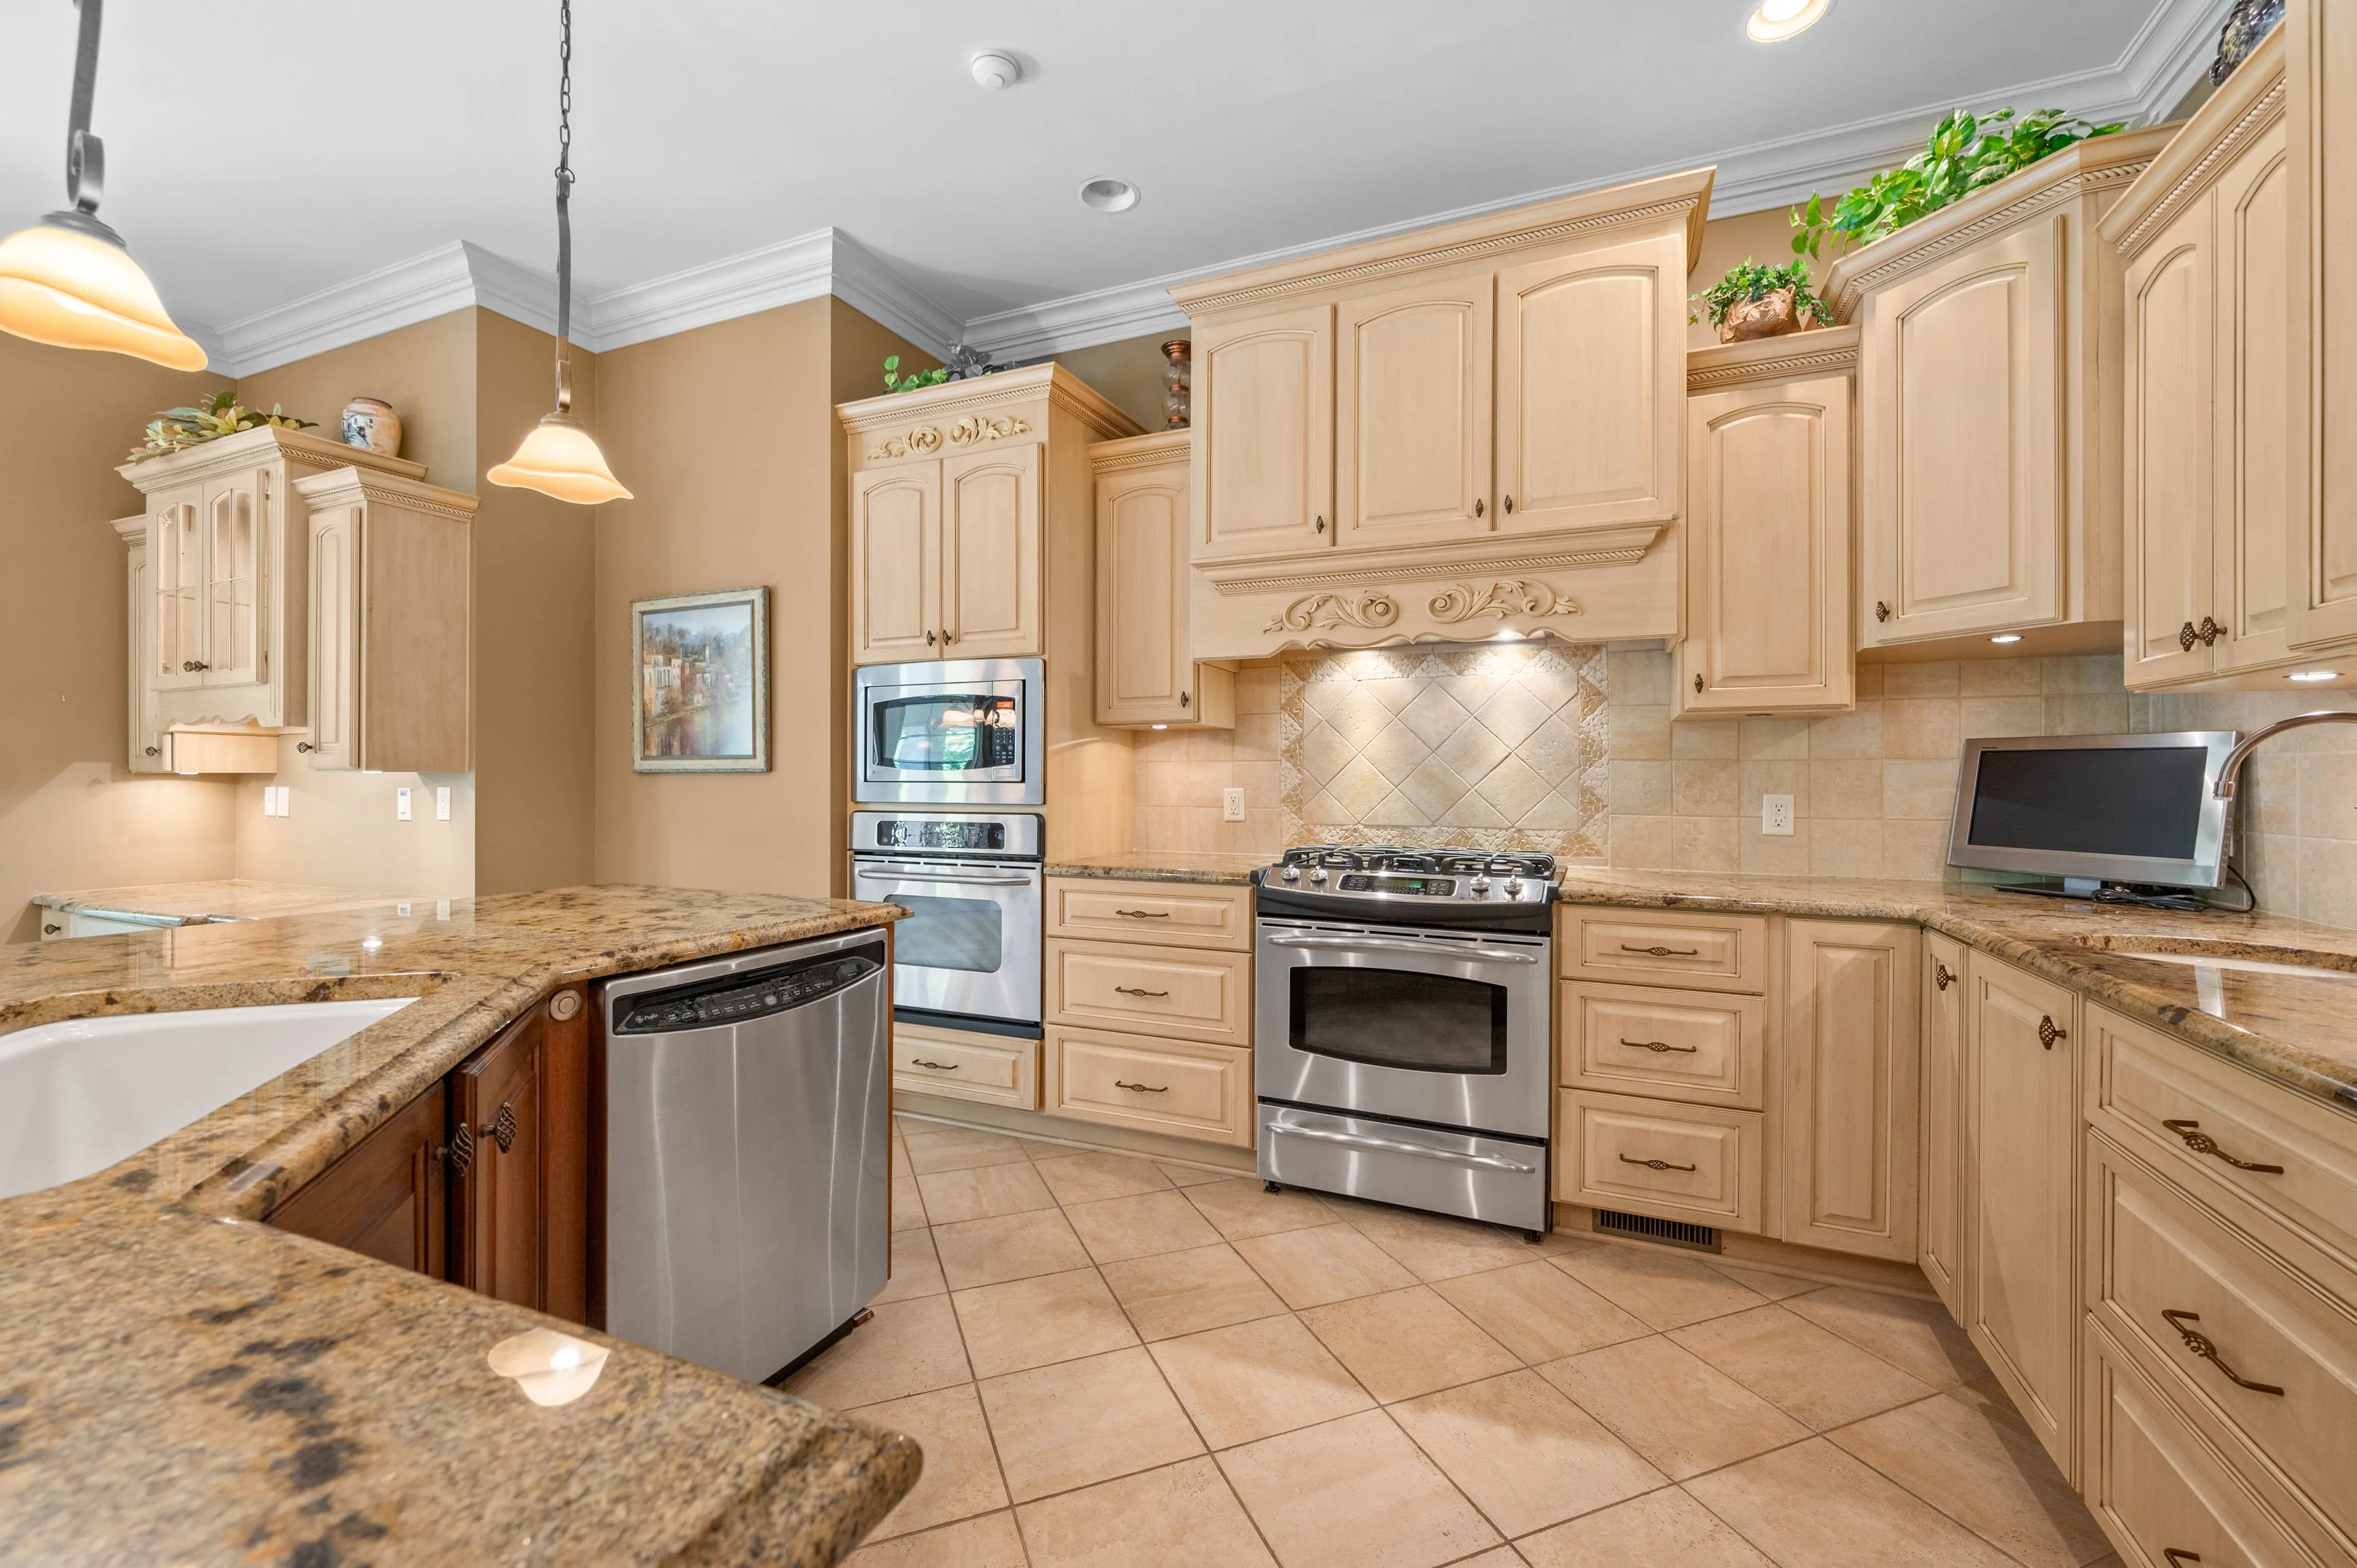 Spacious kitchen interior with beige cabinetry, granite countertops, stainless steel appliances, and pendant lighting.